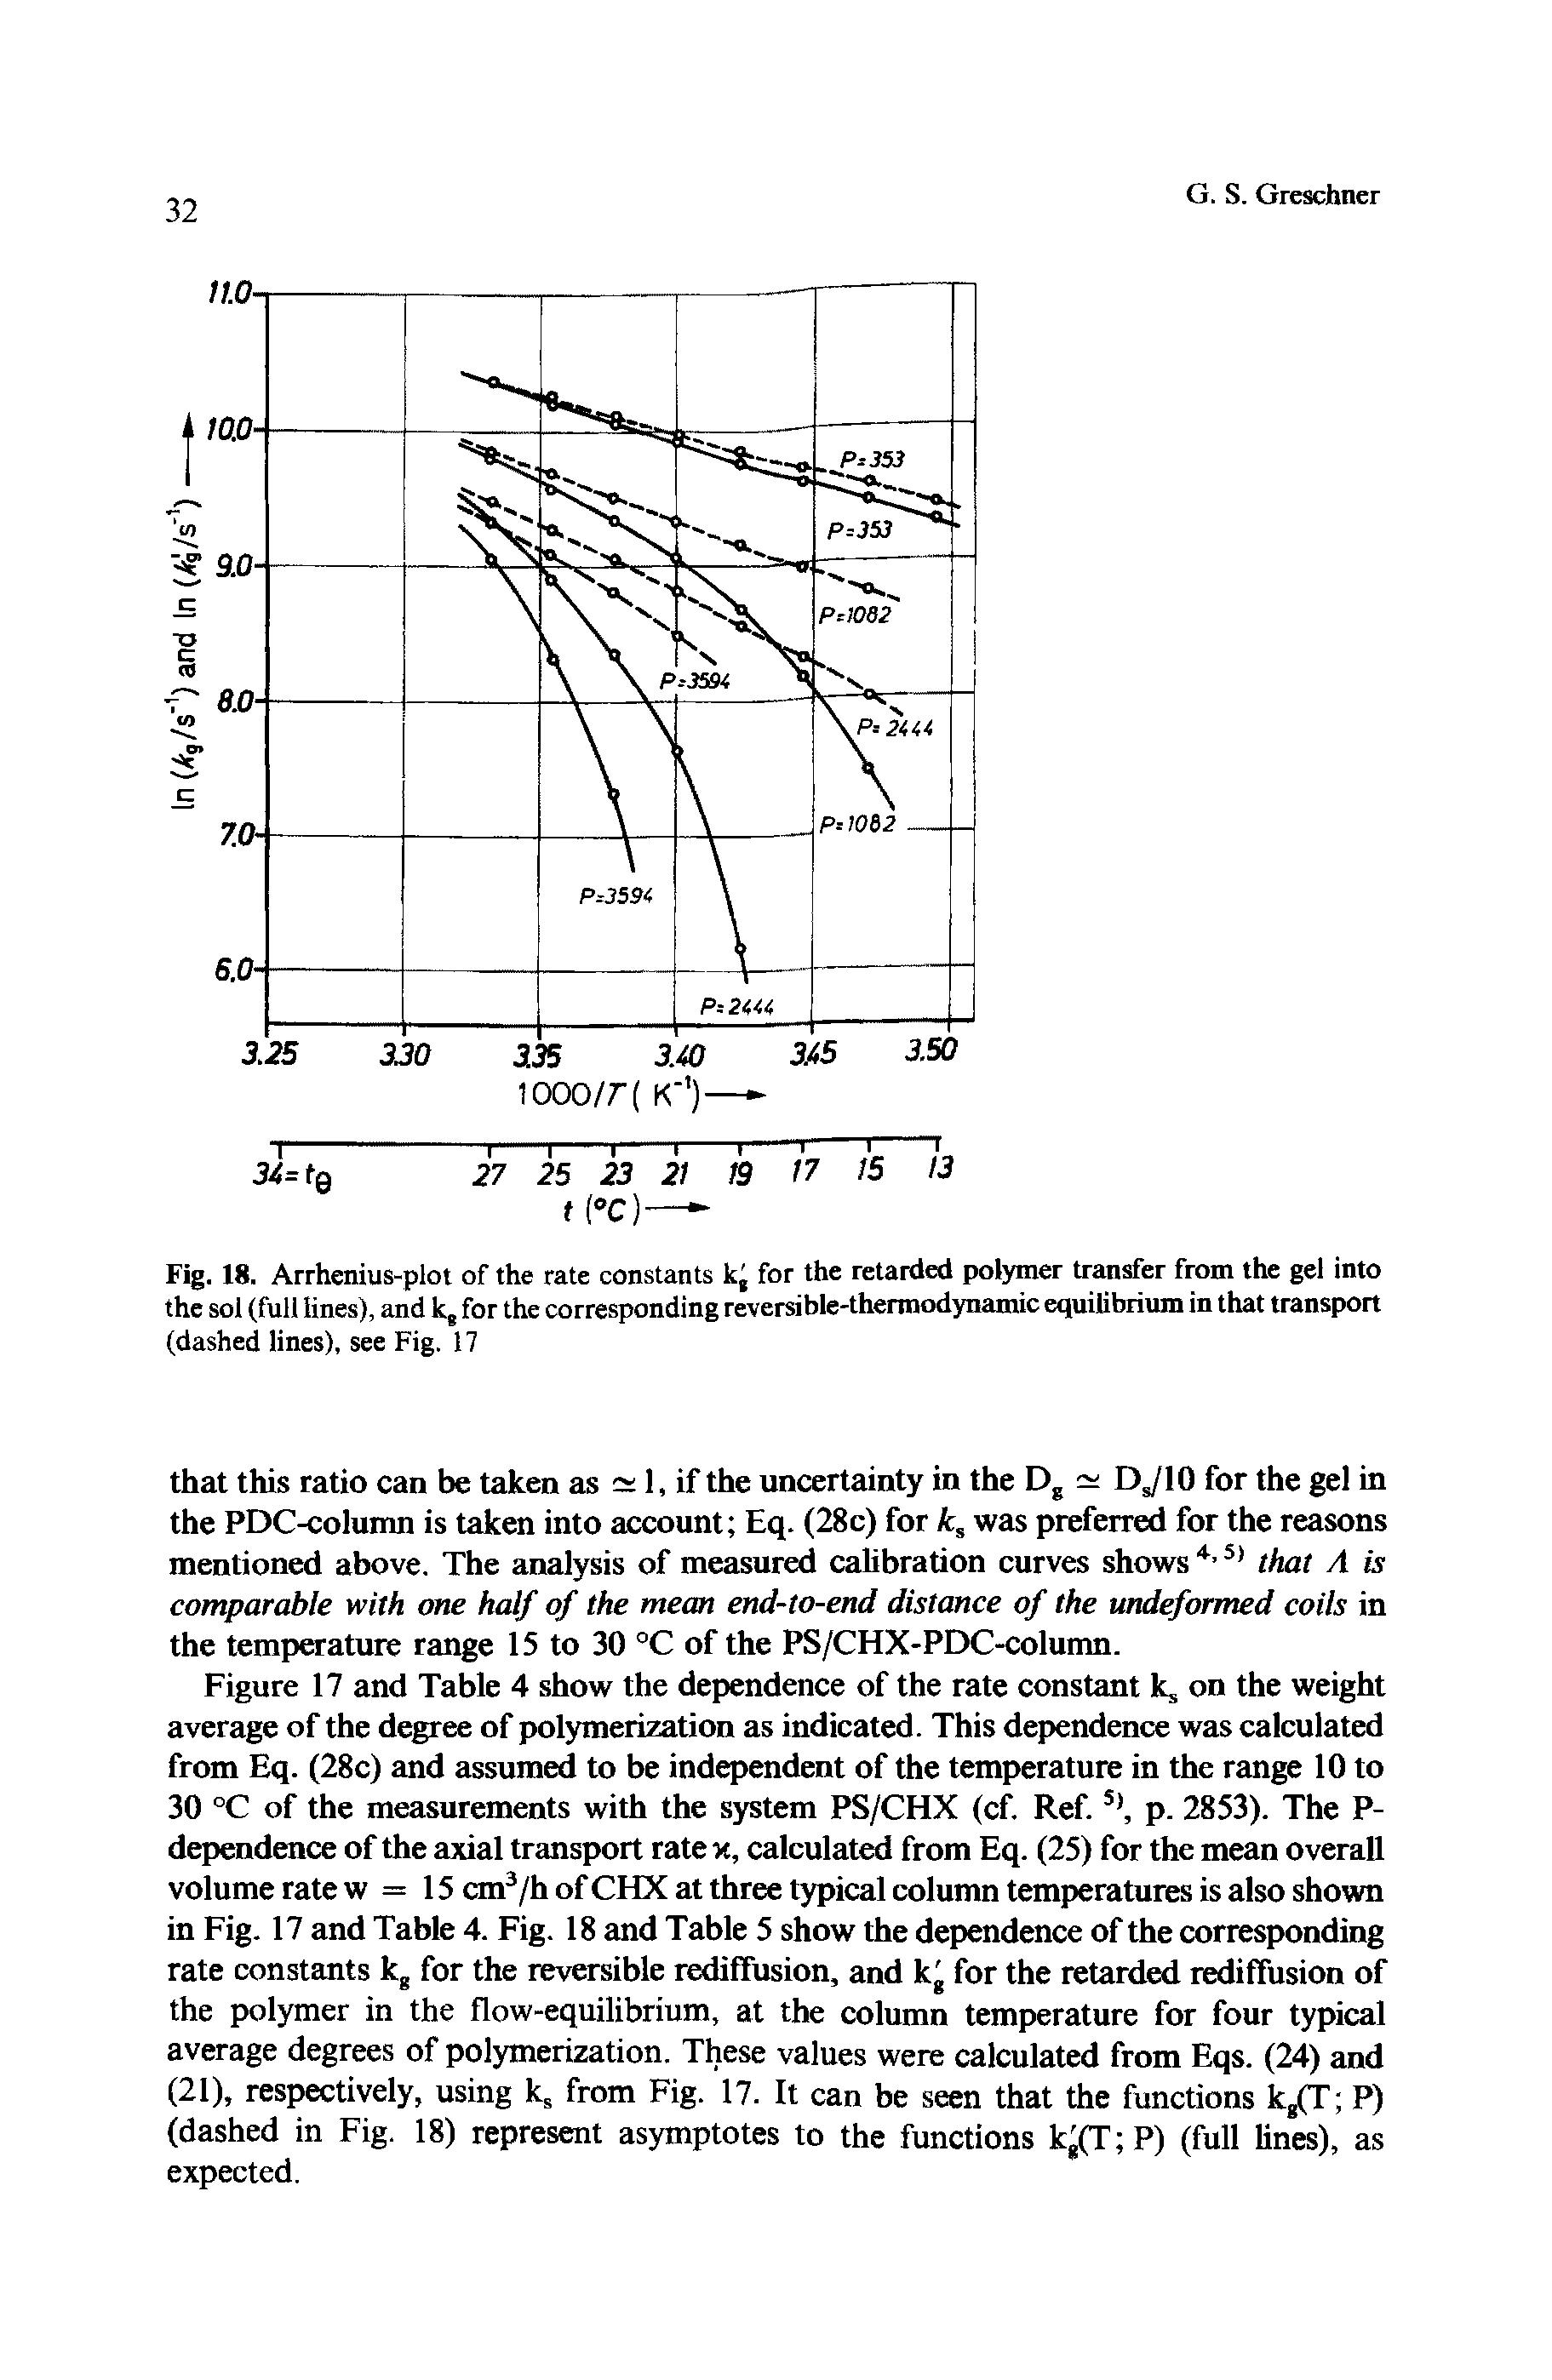 Figure 17 and Table 4 show the dependence of the rate constant k on the weight average of the degree of polymerization as indicated. This dependence was calculated from Eq. (28c) and assumed to be independent of the temperature in the range 10 to 30 °C of the measurements with the system PS/CHX (cf. Ref.5), p. 2853). The P-dependence of the axial transport rate x, calculated from Eq. (25) for the mean overall volume rate w = 15 cm3/h of CHX at three typical column temperatures is also shown in Fig. 17 and Table 4. Fig. 18 and Table 5 show the dependence of the corresponding rate constants kg for the reversible rediffusion, and kg for the retarded rediffusion of the polymer in the flow-equilibrium, at the column temperature for four typical average degrees of polymerization. These values were calculated from Eqs. (24) and (21), respectively, using ks from Fig. 17. It can be seen that the functions kg(T P) (dashed in Fig. 18) represent asymptotes to the functions k T P) (full lines), as expected.